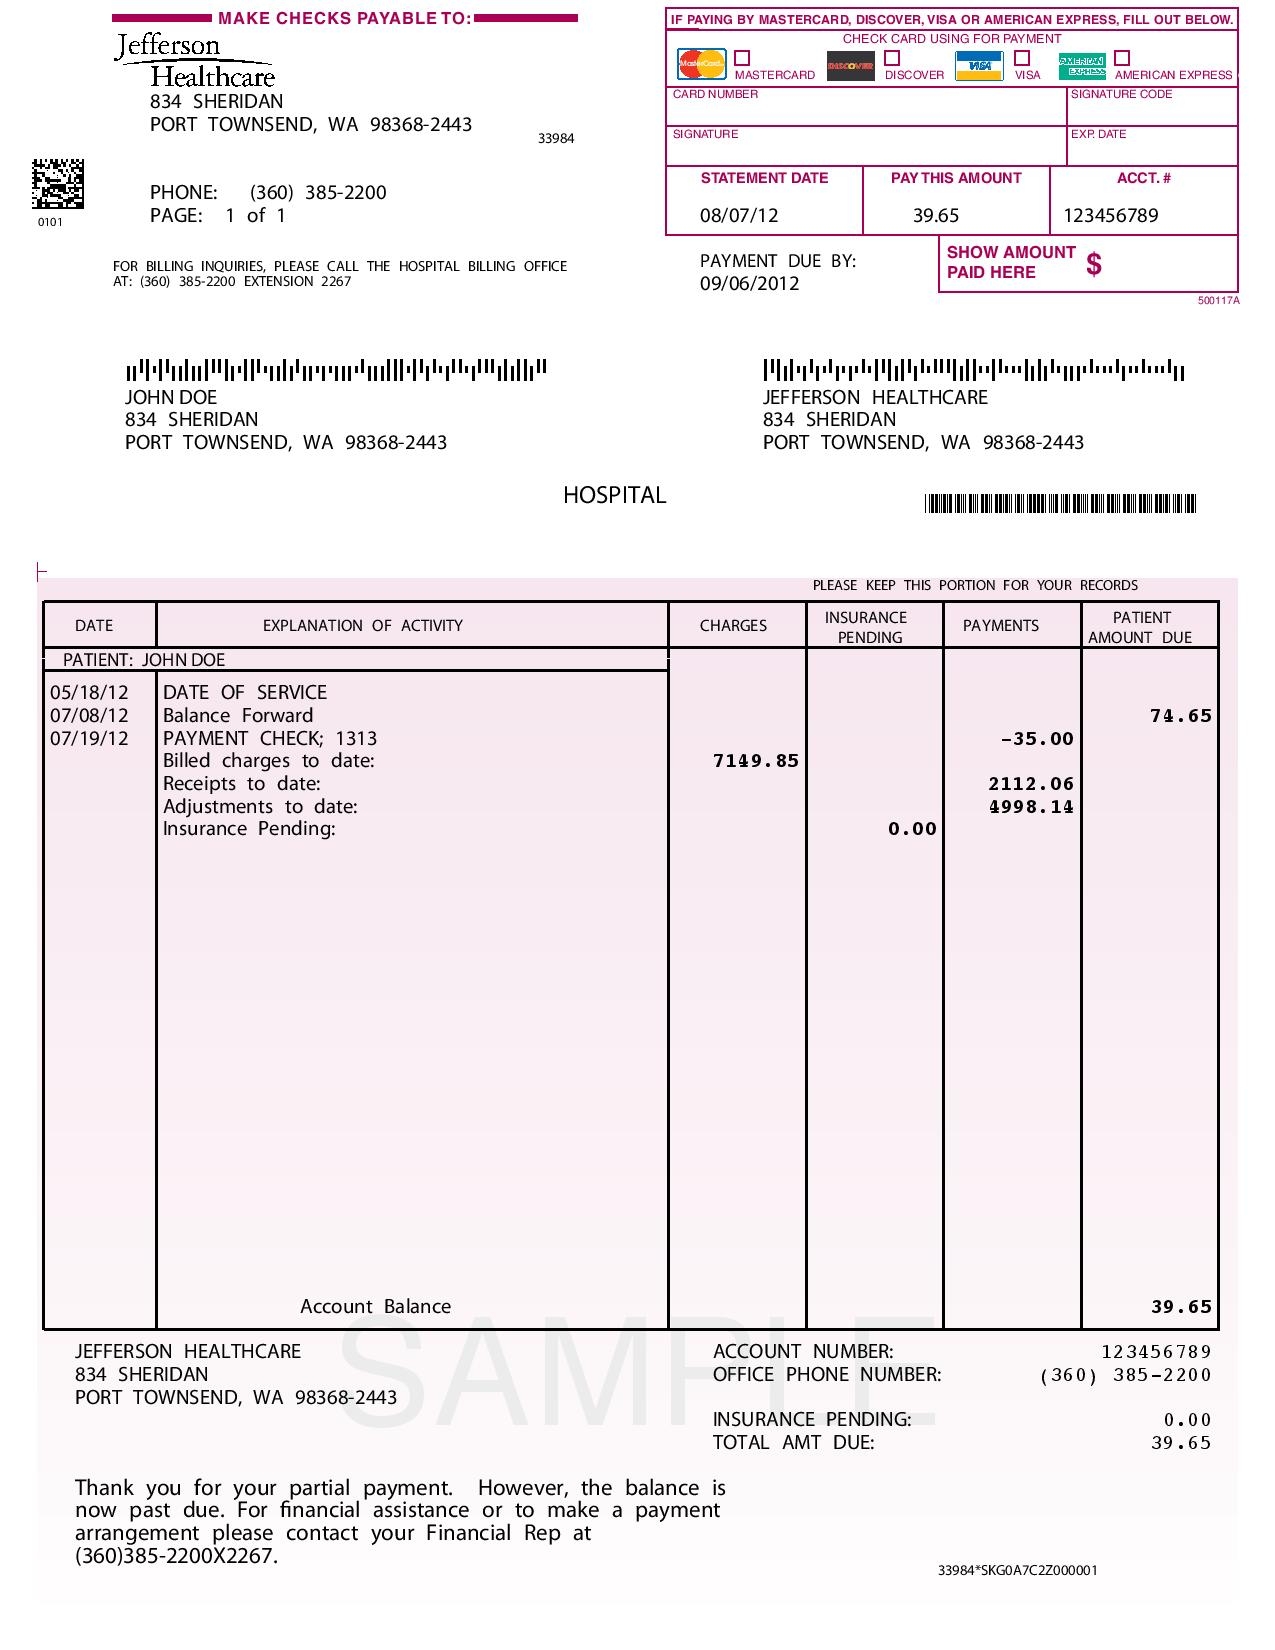 invoice payment terms submit a payment to jefferson healthcare hospital 1275 X 1650